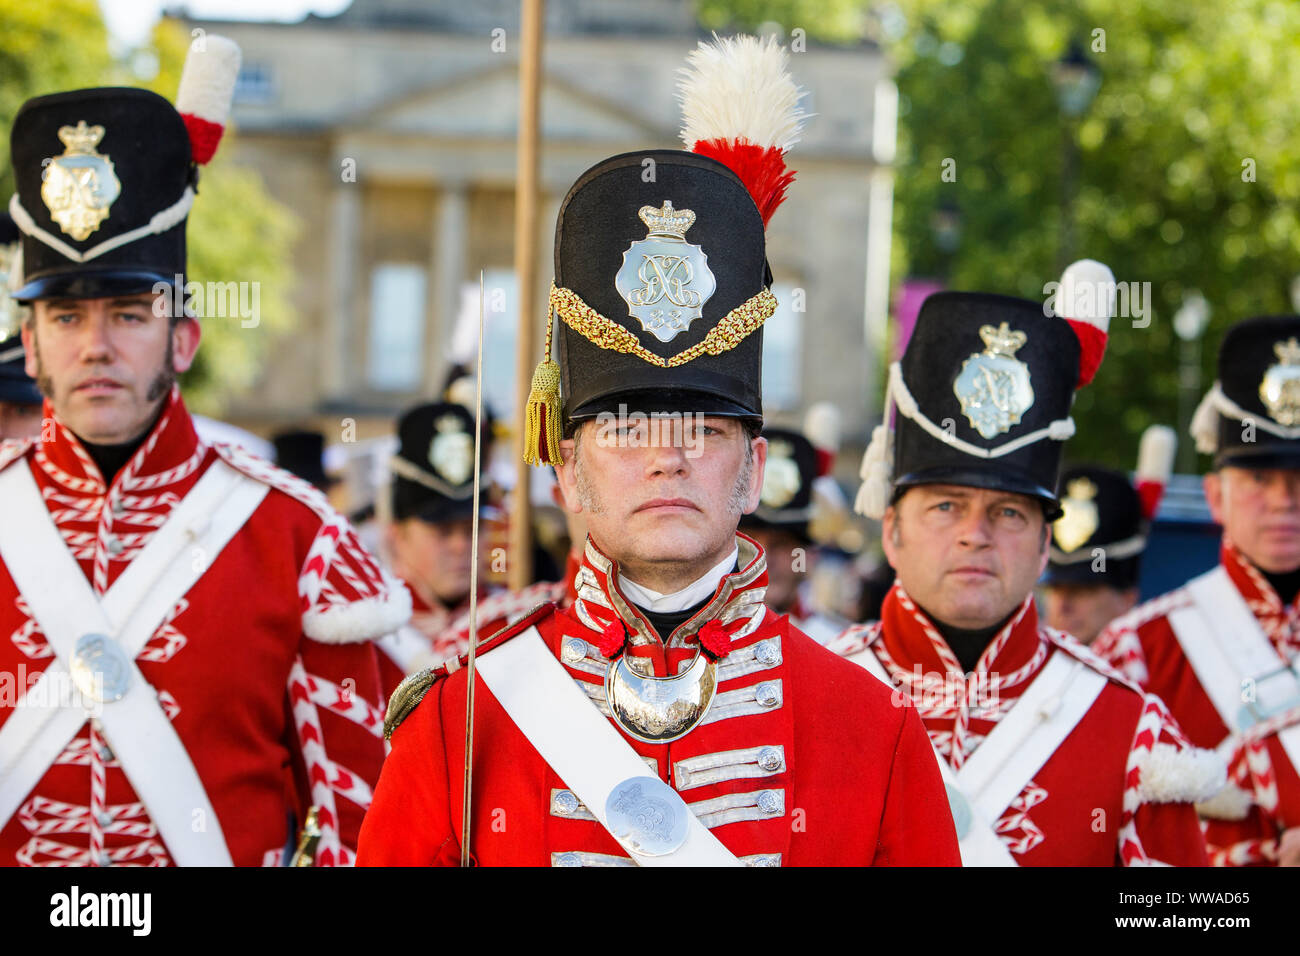 Bath, Somerset, UK. 14th Sep, 2019. Members of the re-enactment group, His Majesty's 33rd Regiment of Foot are pictured marching along Great Pulteney Street as they take part in the world famous Grand Regency Costumed Promenade. The Promenade, part of the 10 day Jane Austen Festival is a procession through the streets of Bath and the participants who come from all over the world dress in 18th Century costume. Credit: lynchpics/Alamy Live News Stock Photo